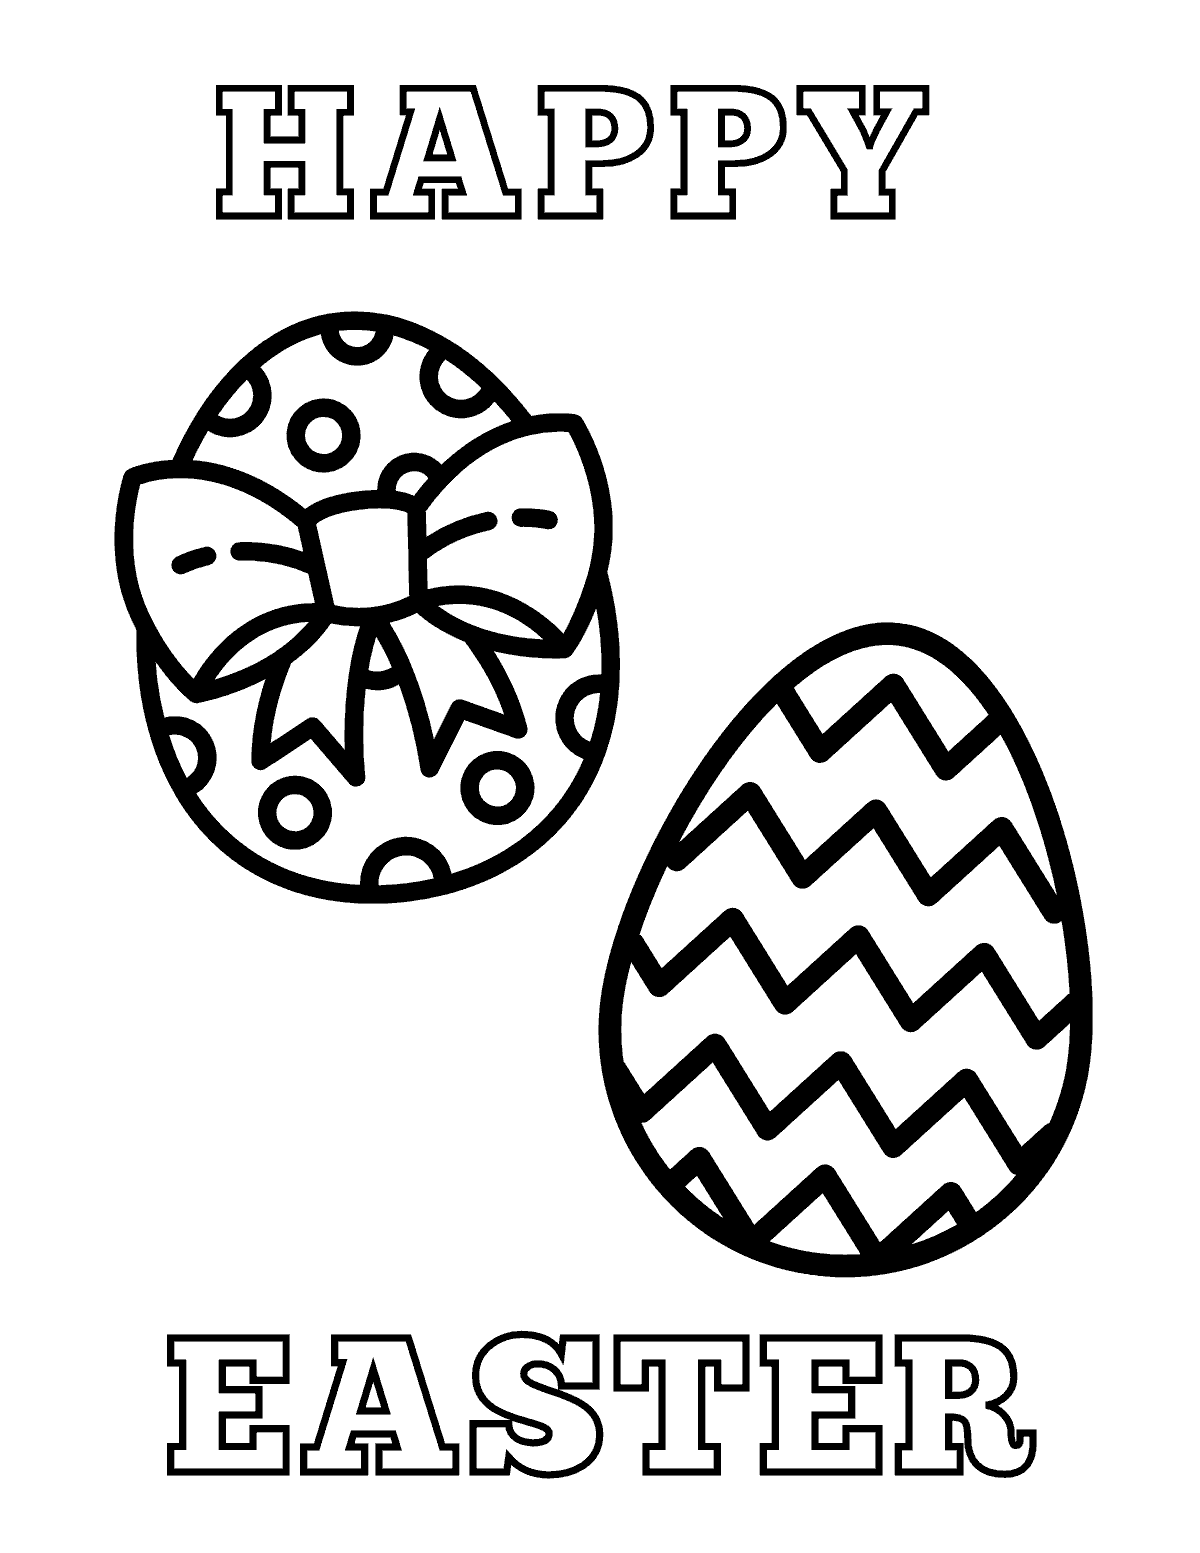 Happy Easter with Easter Eggs Coloring Page